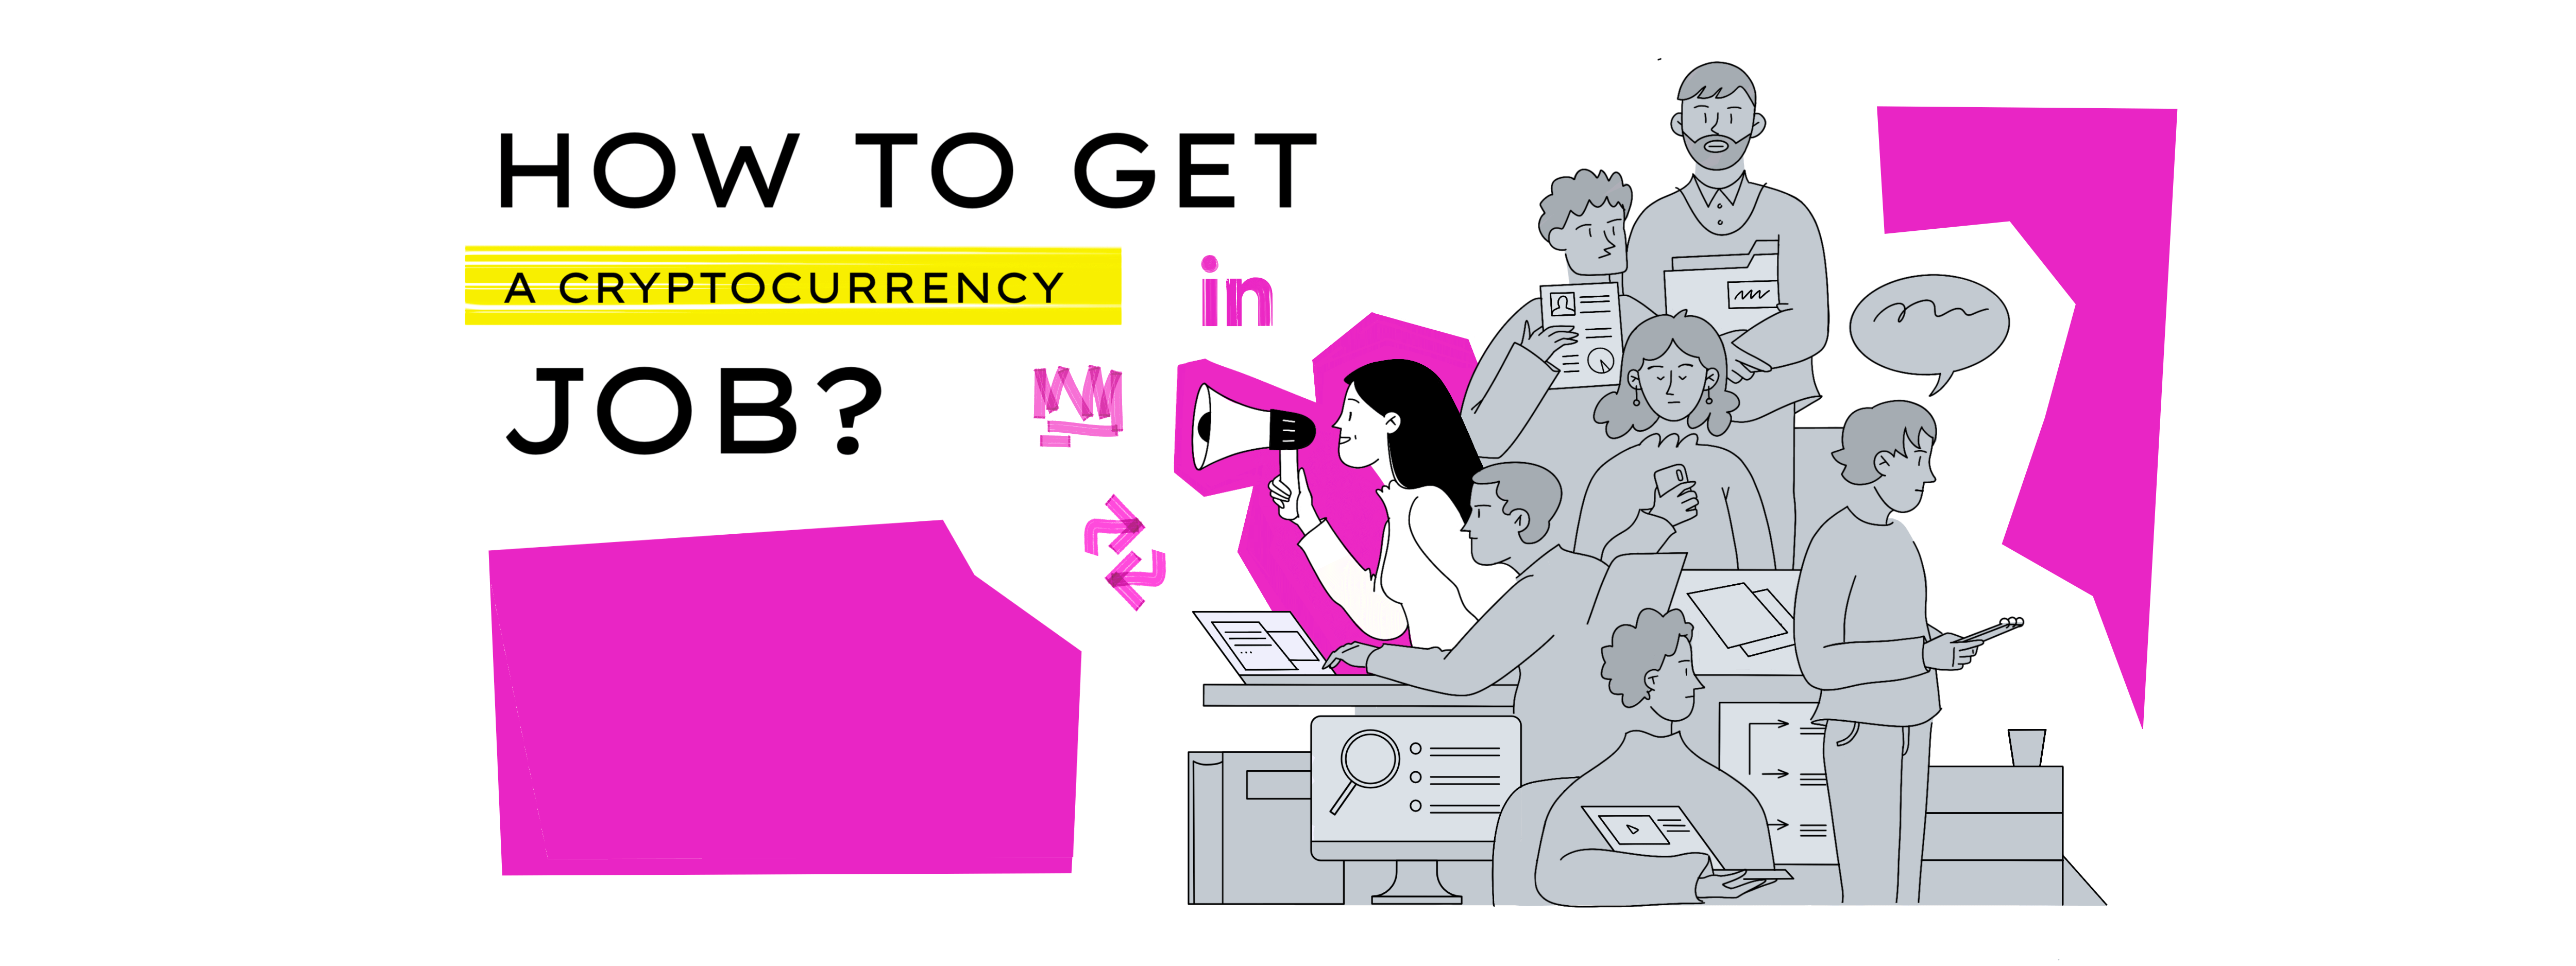 How do you get a cryptocurrency job?